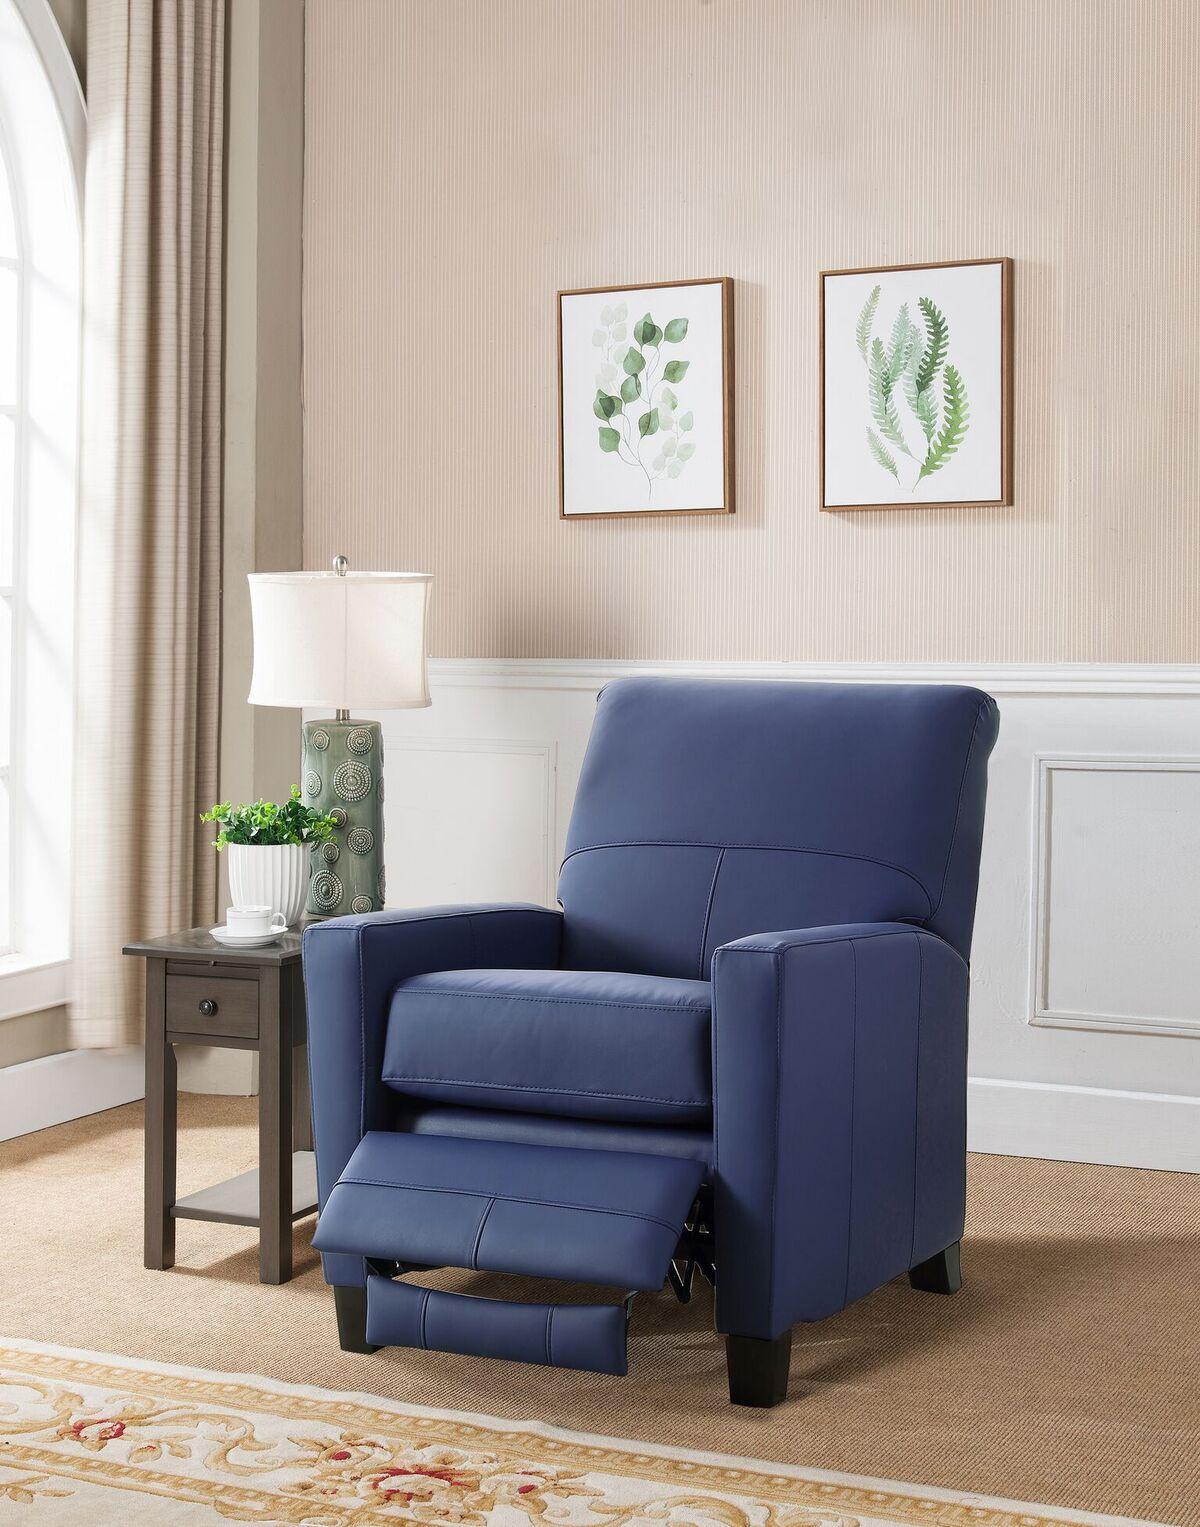 Contemporary, Modern Recliner Chair Hydeline Conway Conway-NAVY in Navy Top grain leather